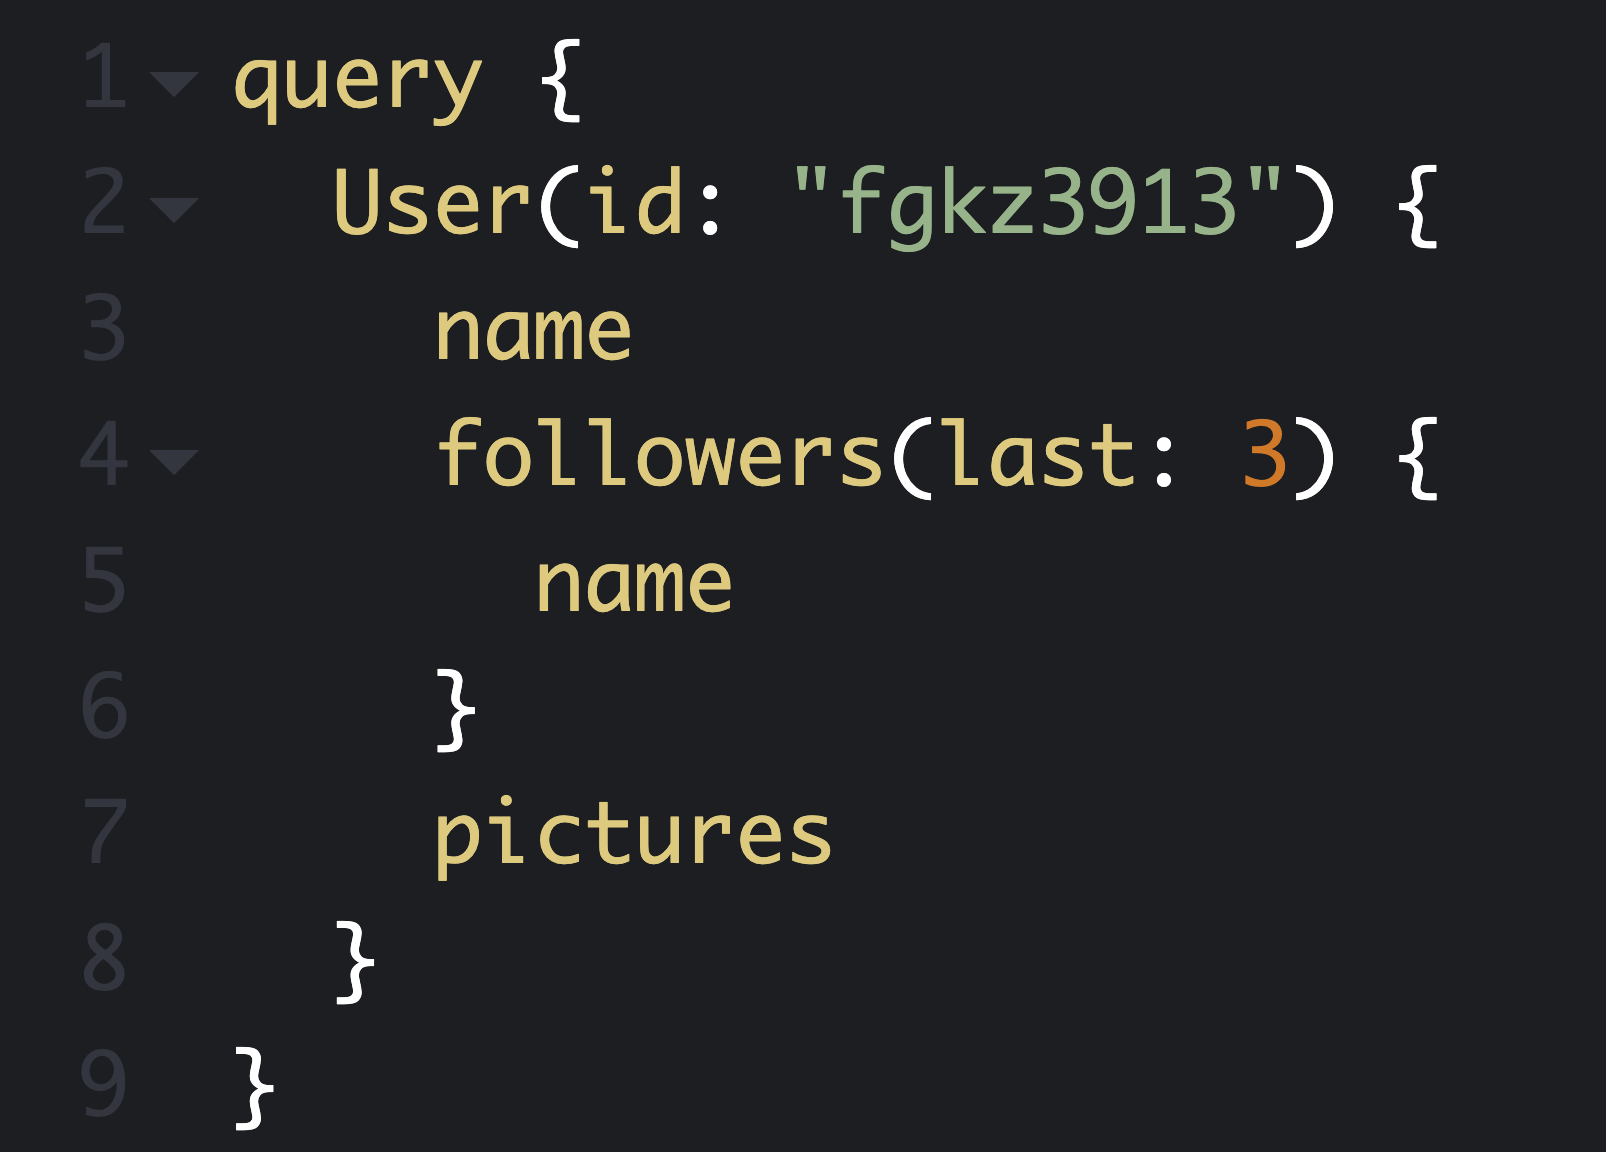 Image shows code - GraphQL query to get user data